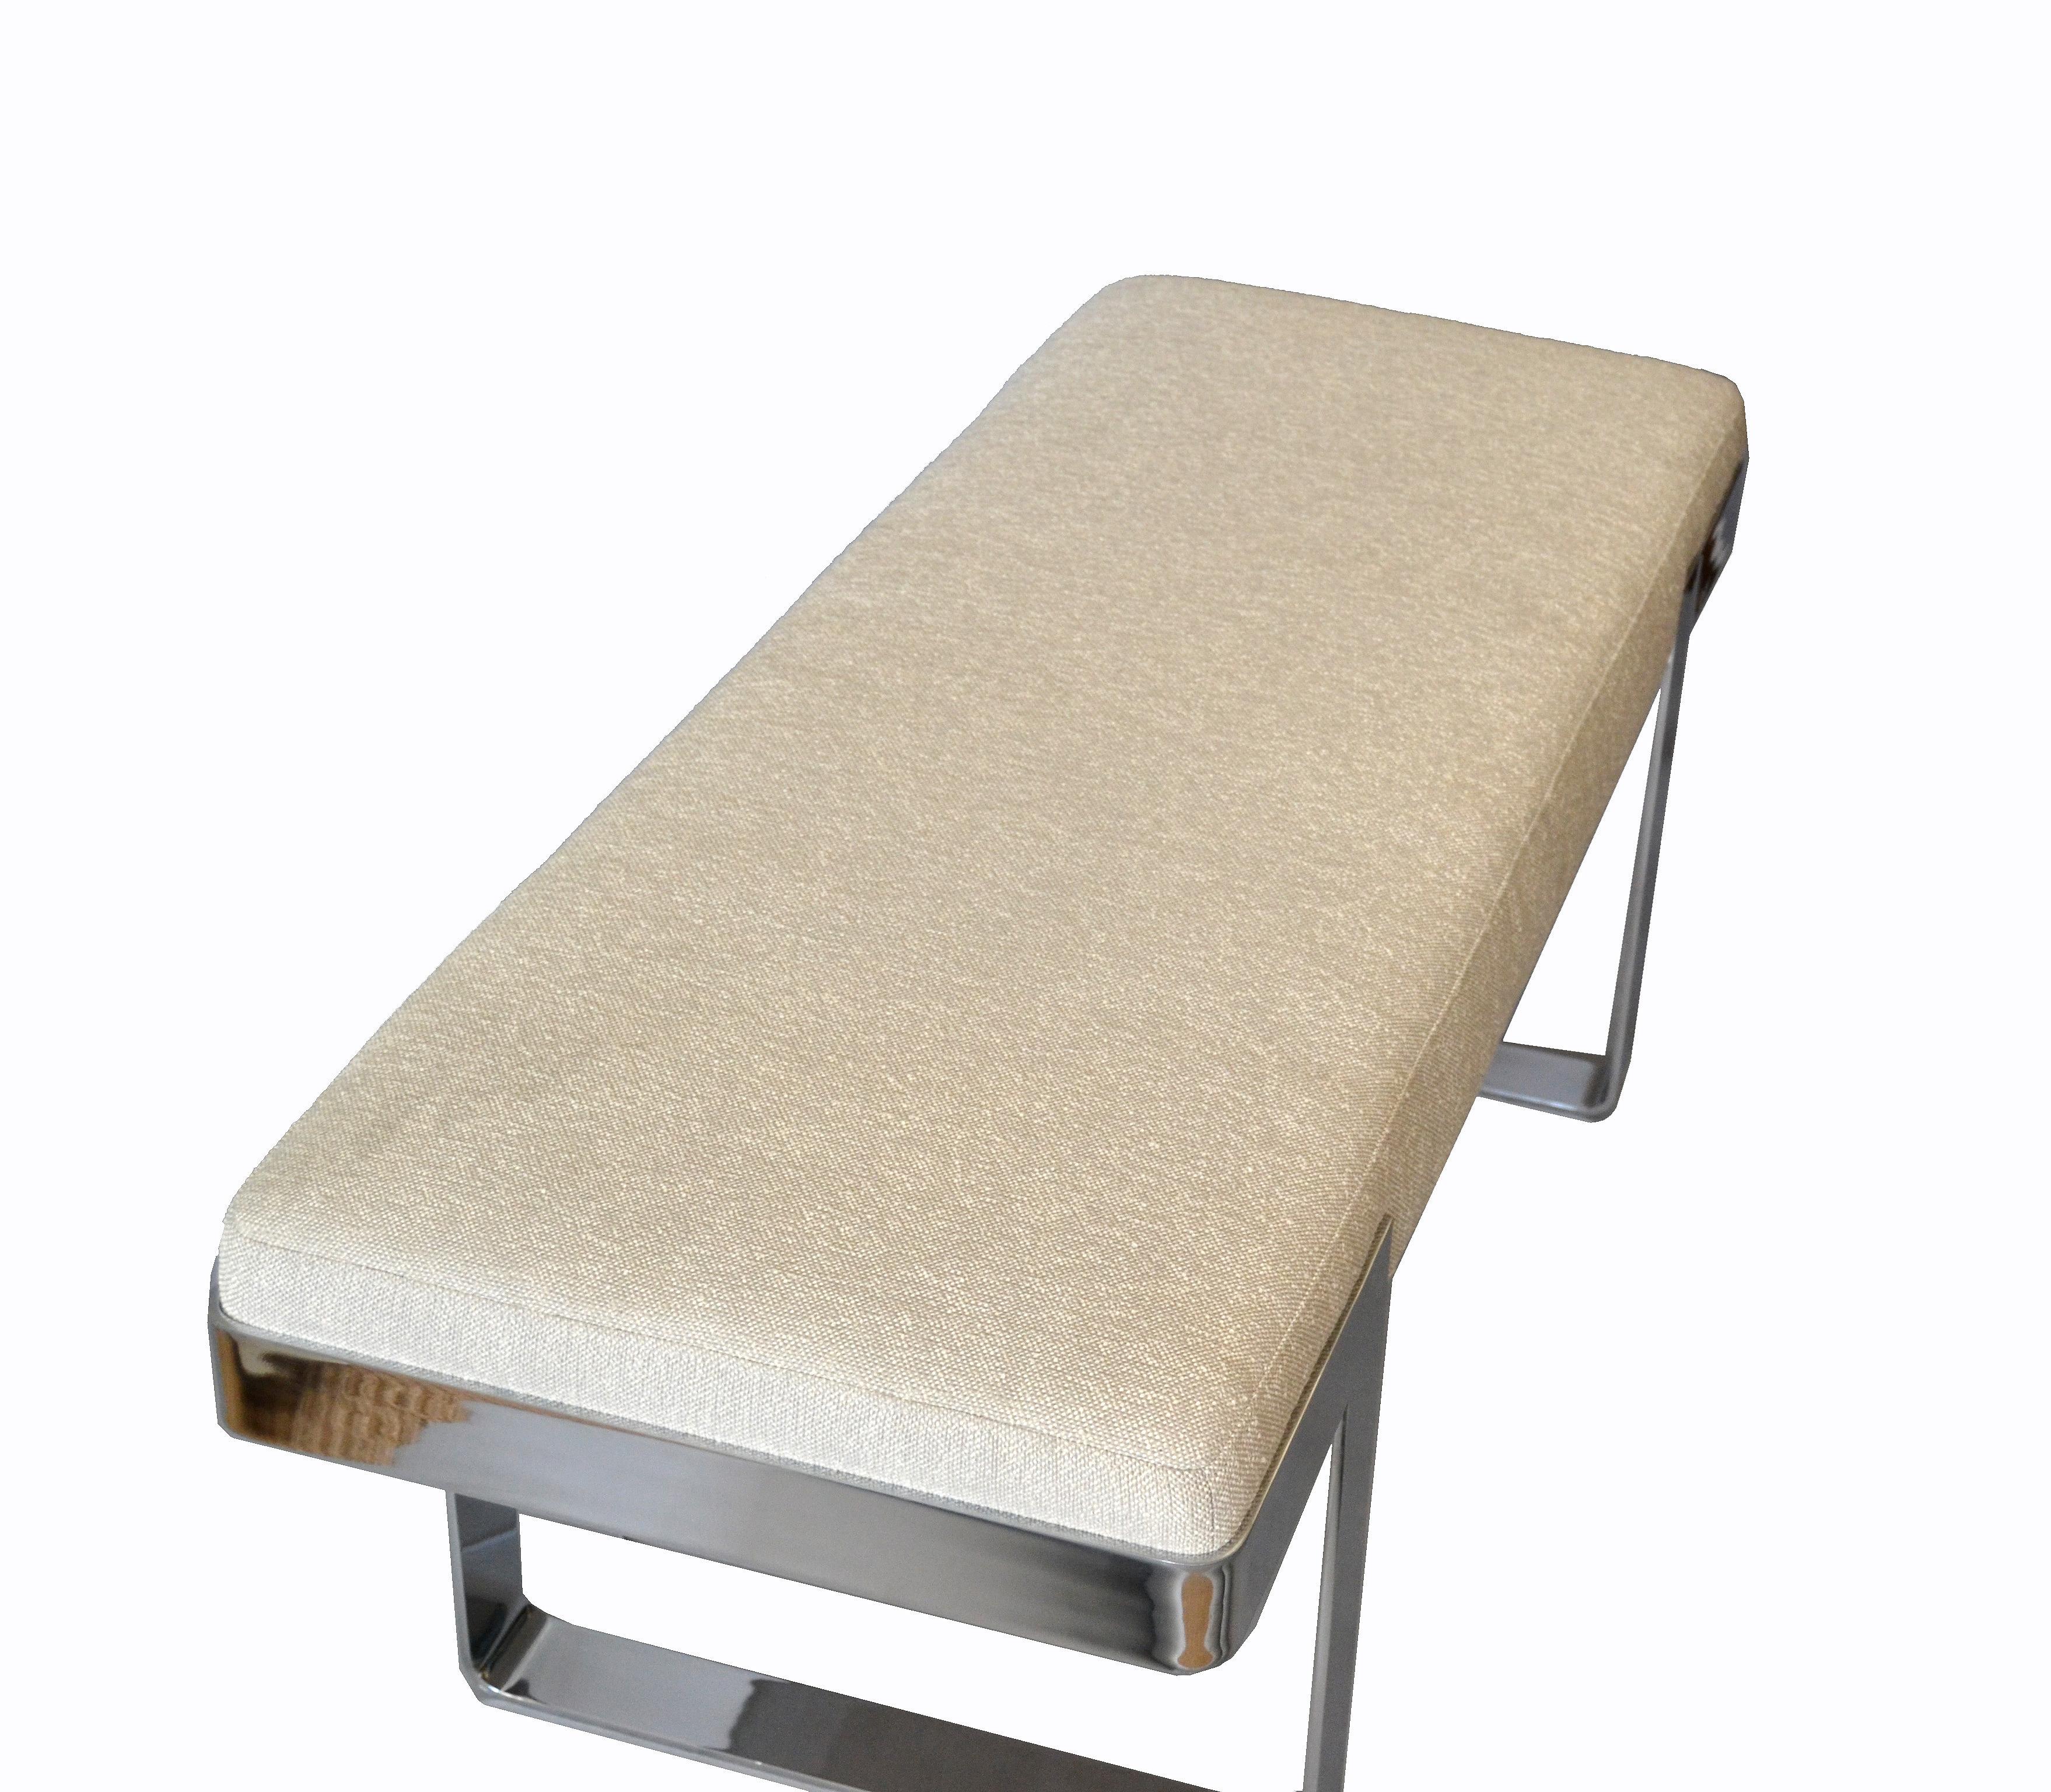 Late 20th Century 1 of 2 Milo Baughman Benches Linen Fabric in Beige on Steel Base Pace Collection